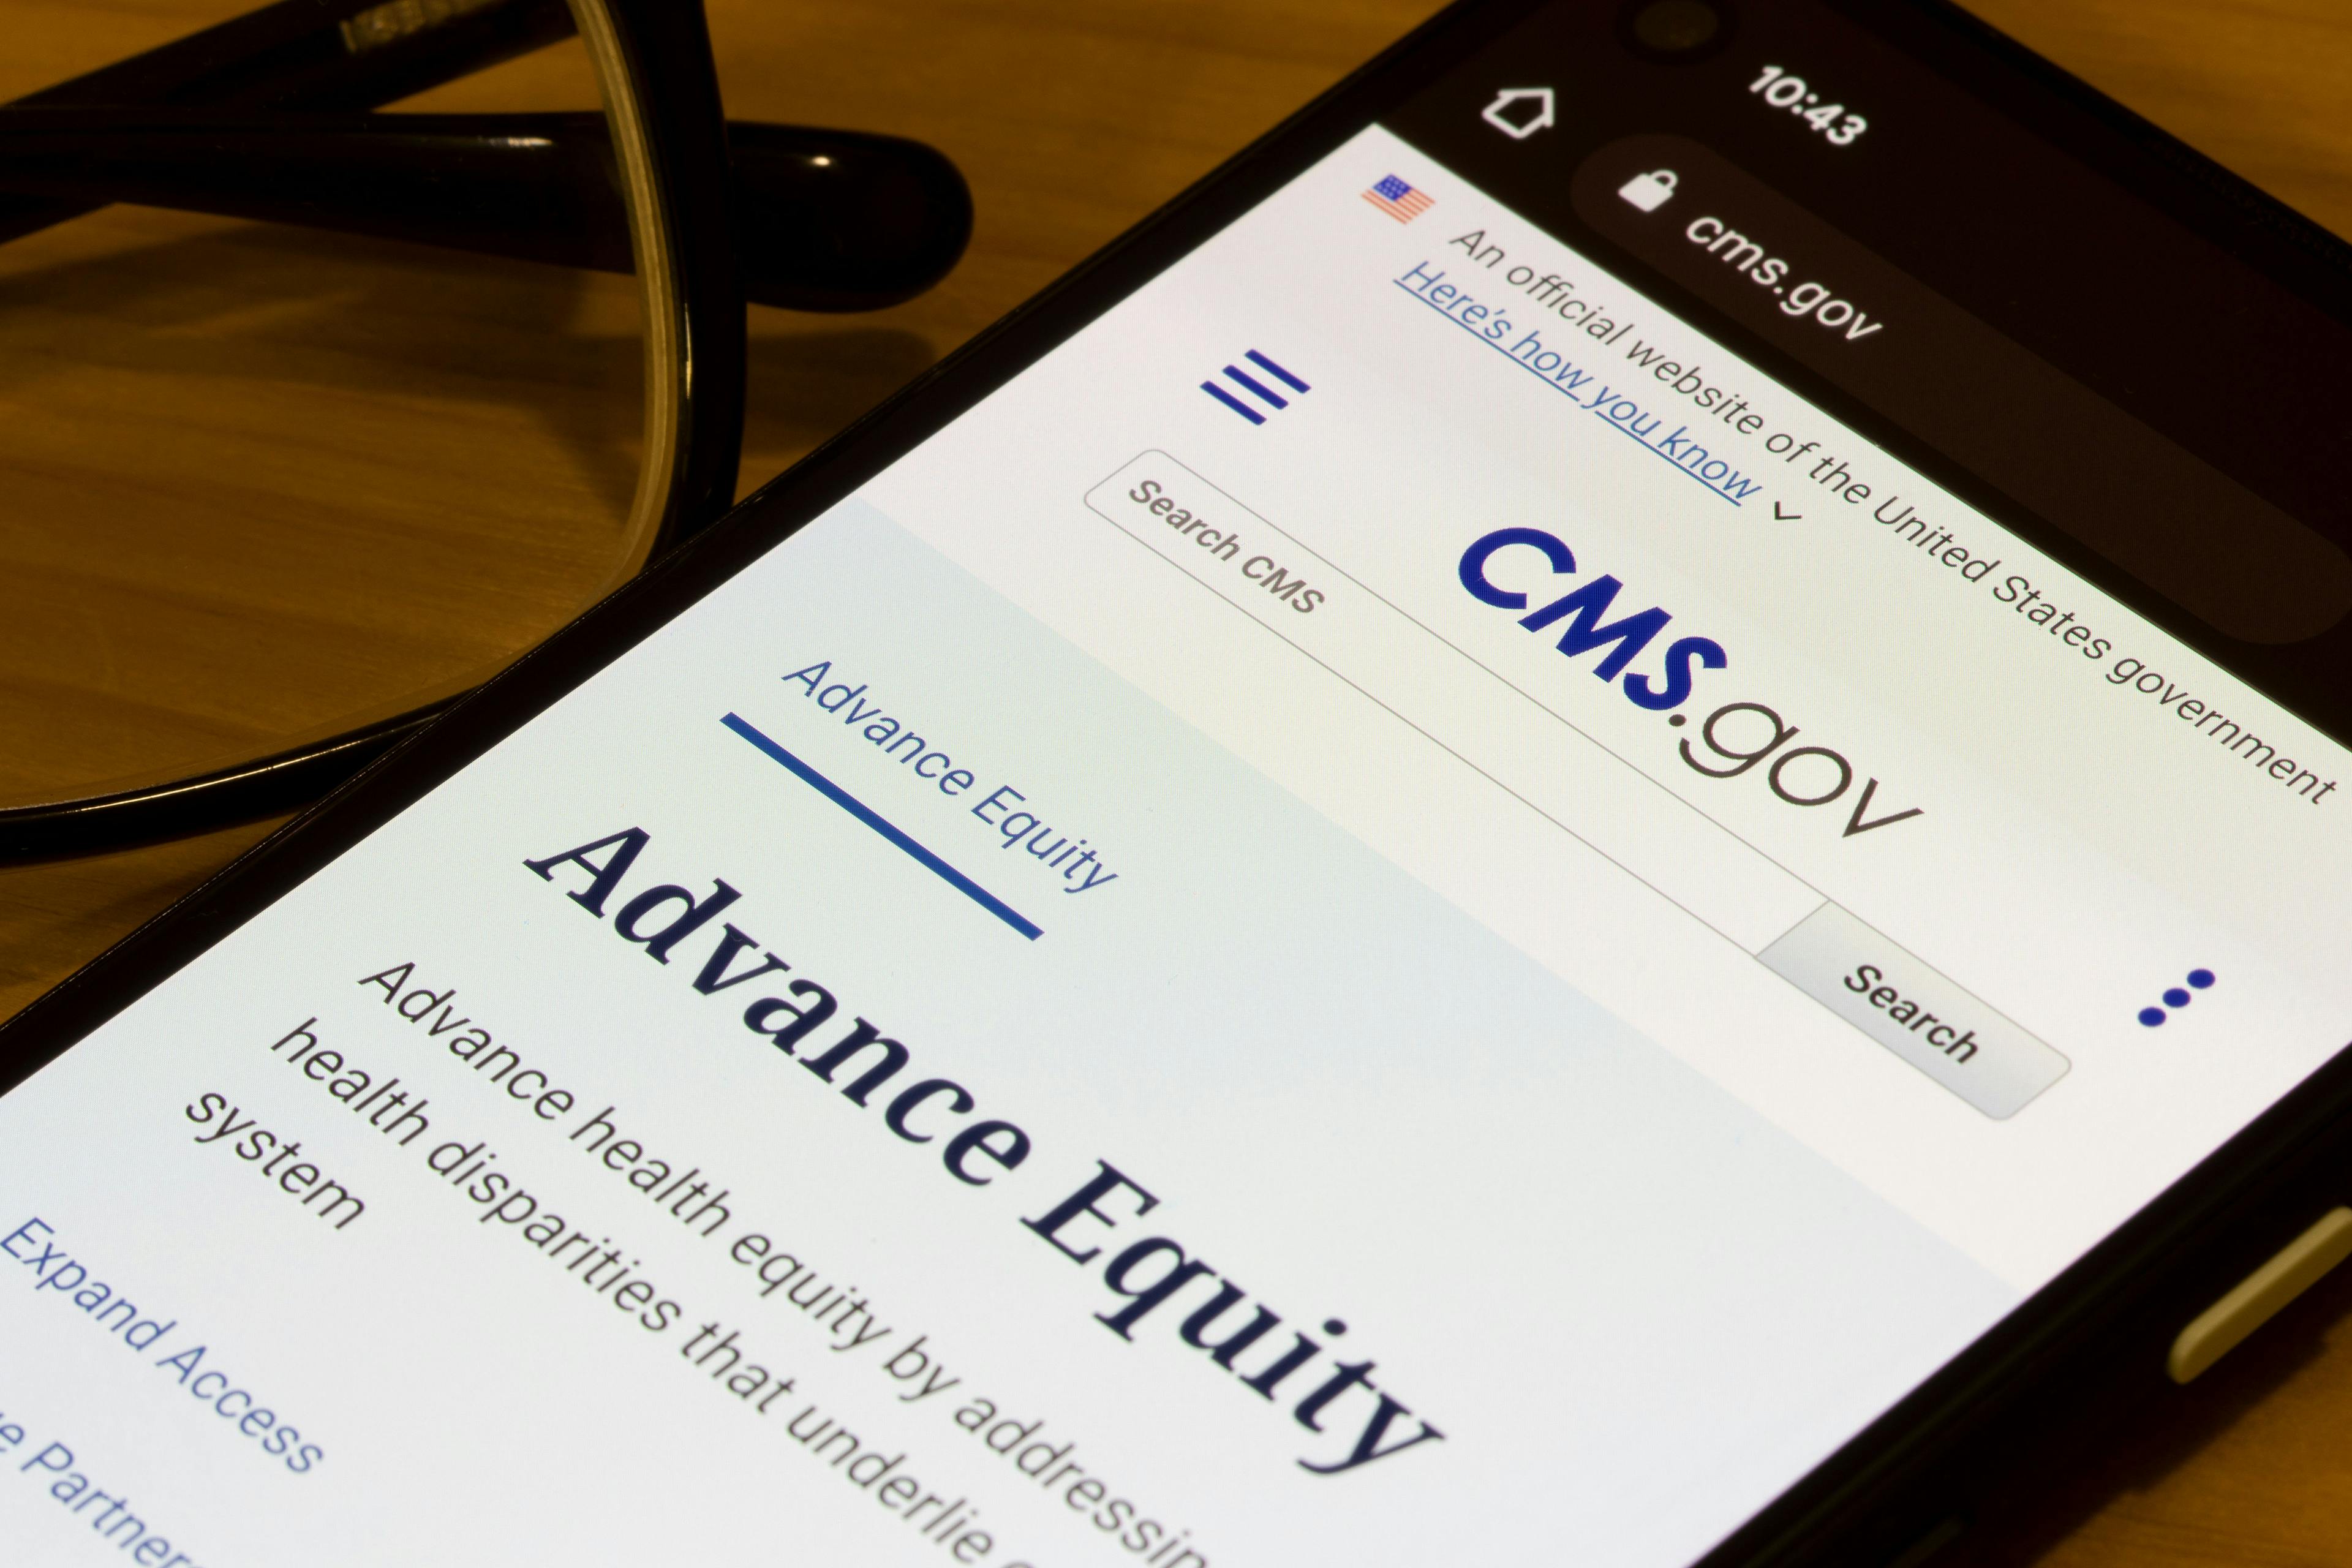 The homepage of CMS.gov is seen on a smartphone | Image Credit: © Tada Images - stock.adobe.com